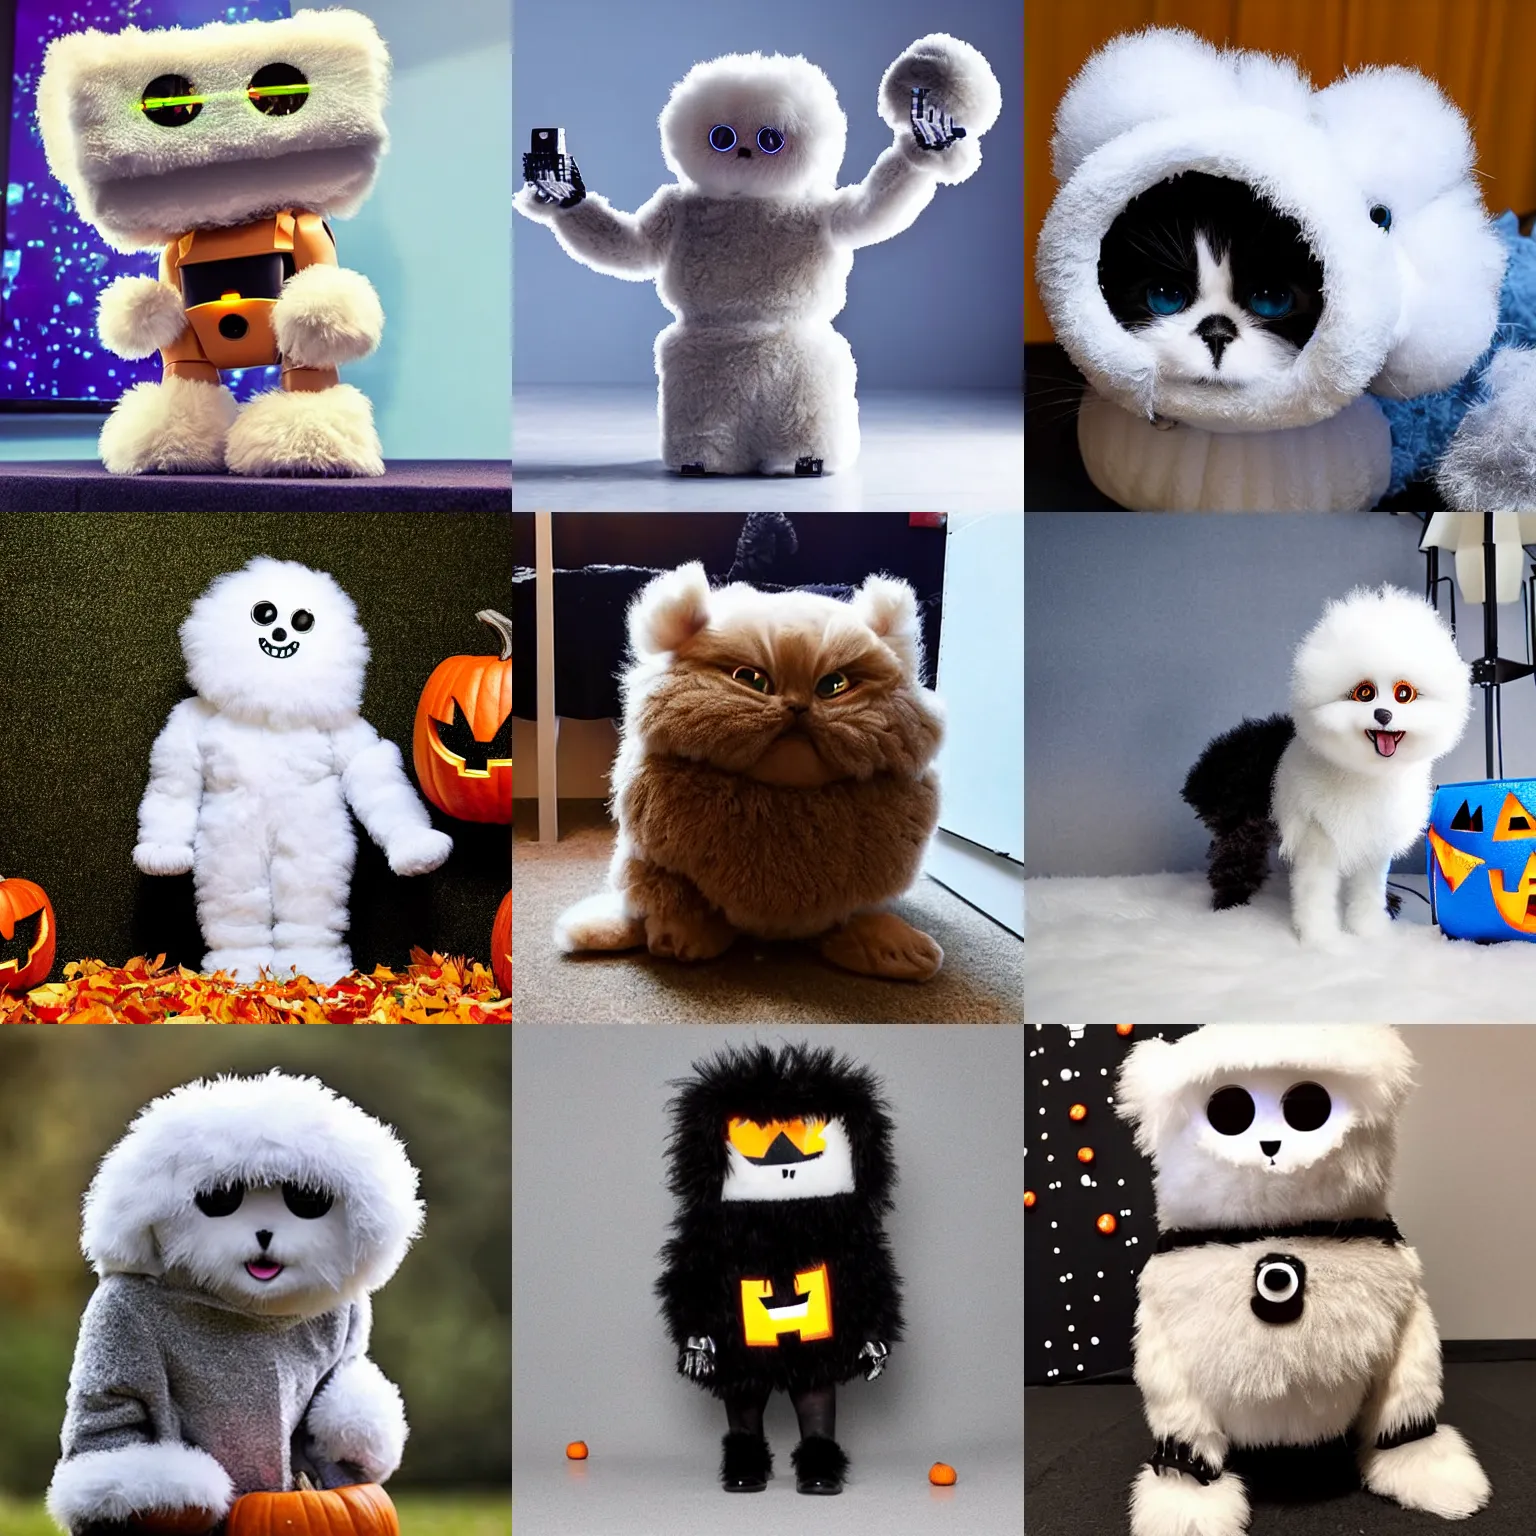 Prompt: <picture quality=hd+ mode='attention grabbing'>an adorable fluffy robot tries on a Halloween outfit</picture>